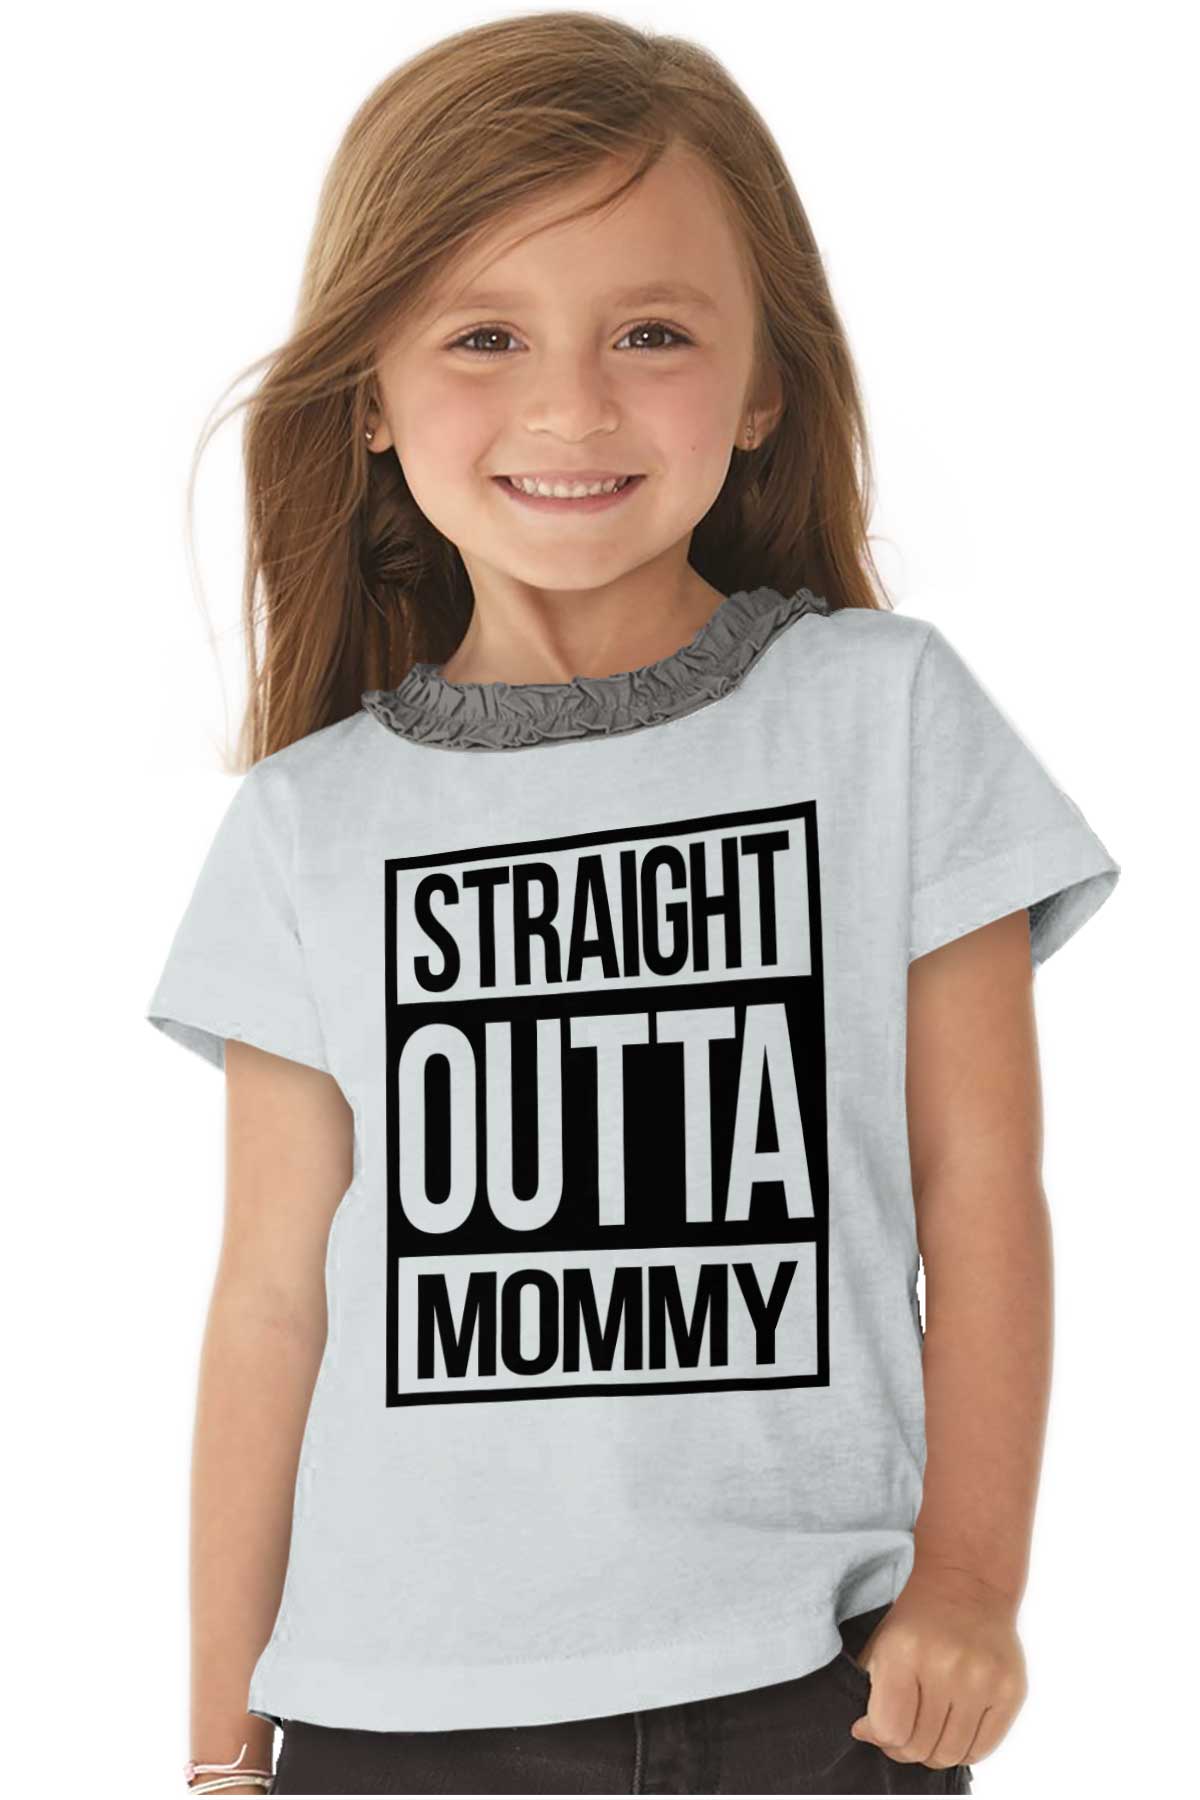 Straight Outta Mommy Funny Shower Gift Idea Girls Toddler Ruffled Trim ...